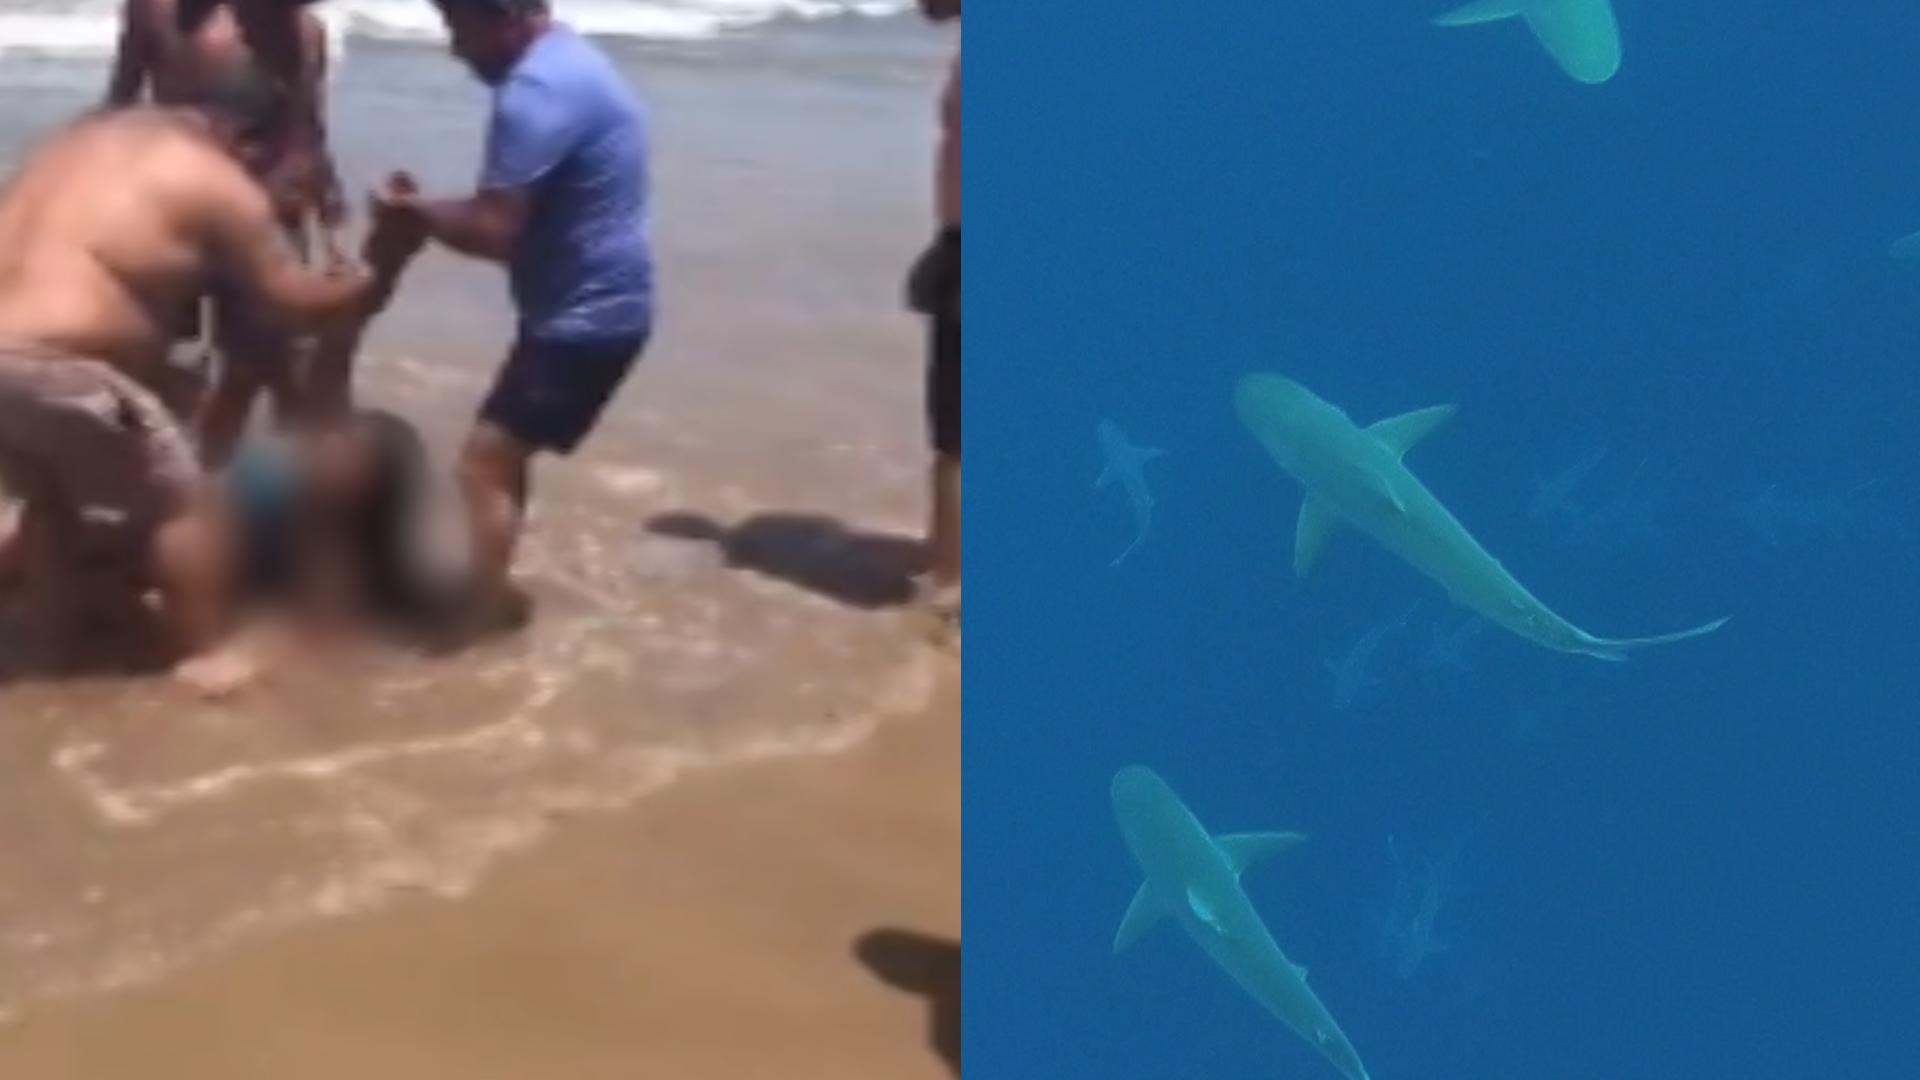 Shark attack: girl (15) loses arm at horror beach Two incidents in 48 hours